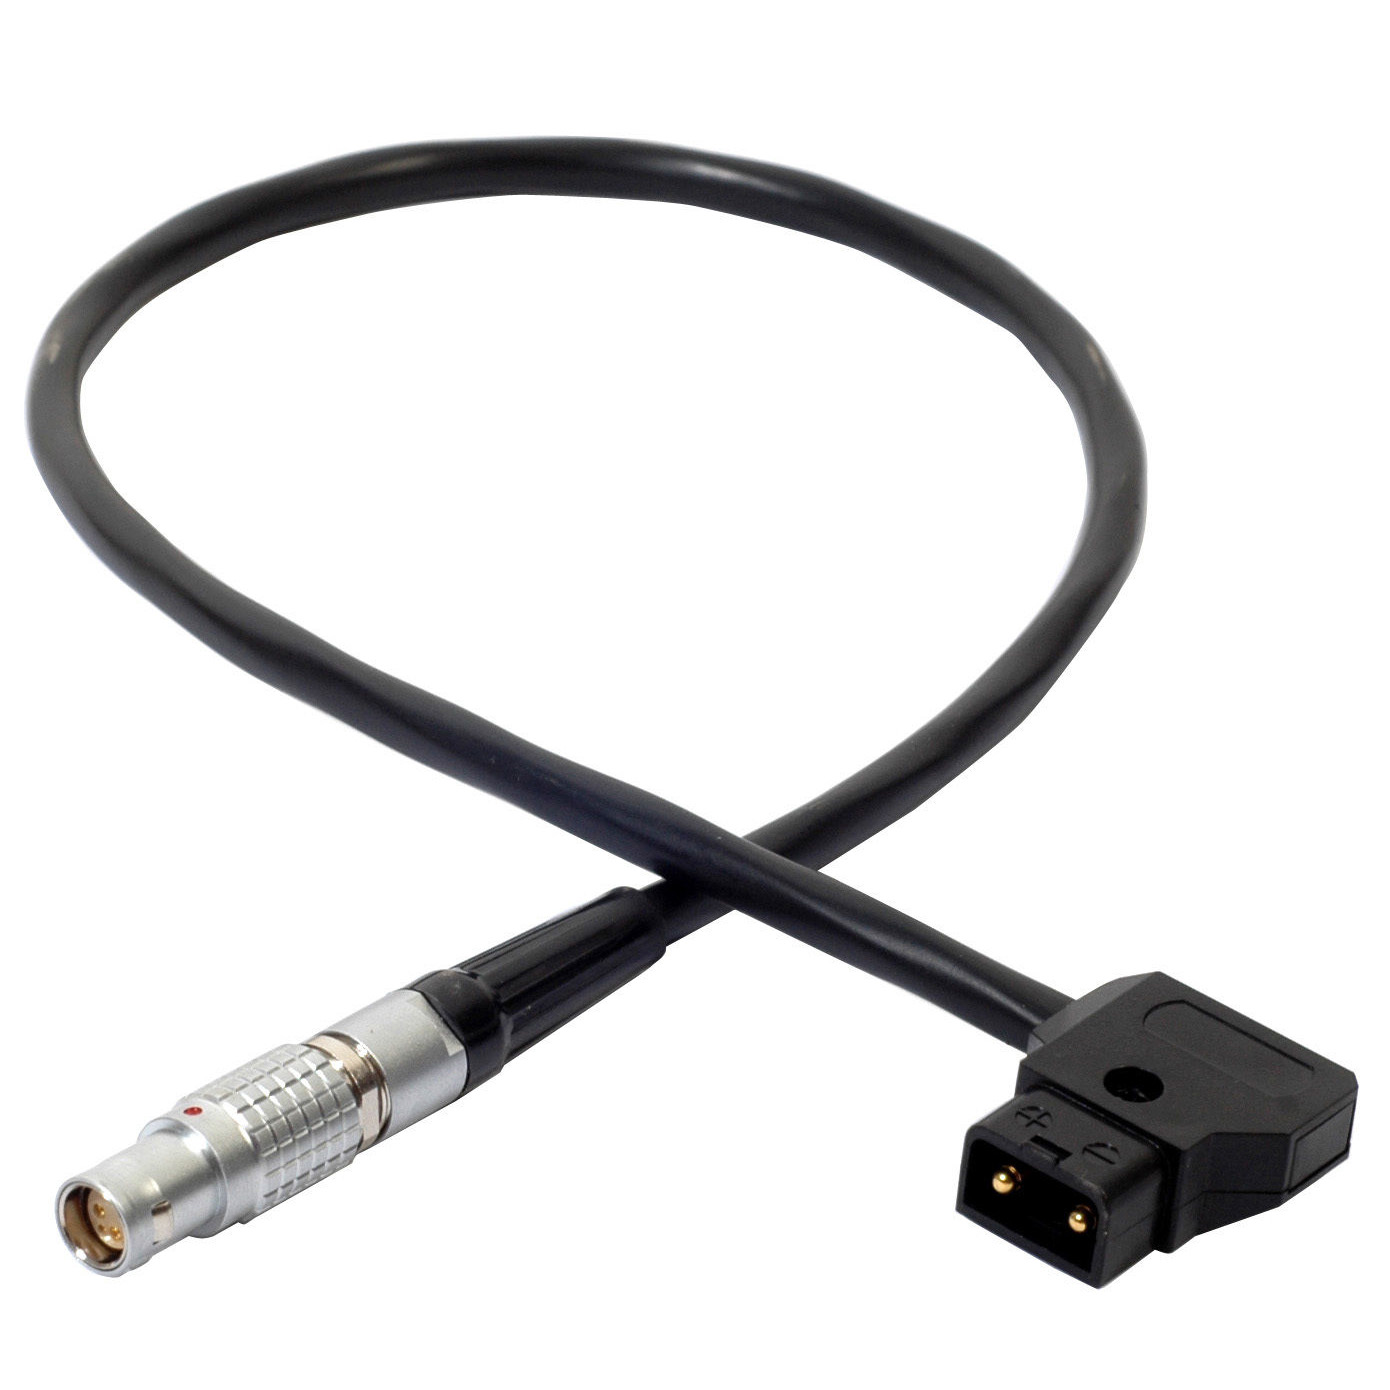 RED D-Tap to Power Cable (3) - Cordon d'alimentation - TRM